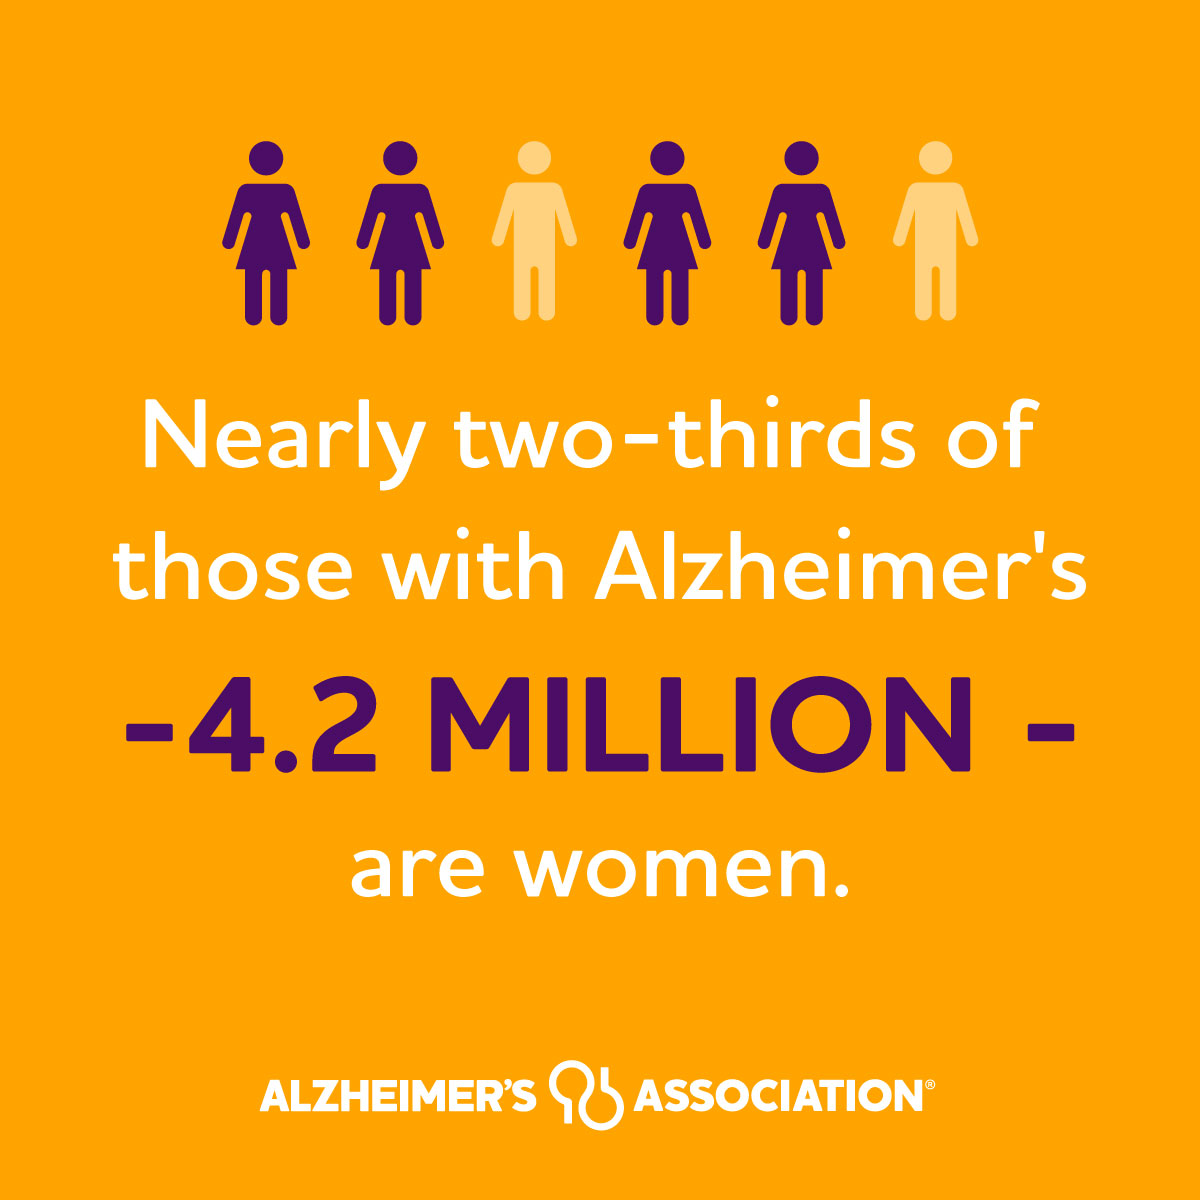 Repost to share the facts in honor of our mothers, sisters, daughters and all the brave women who are impacted by Alzheimer’s and other dementia. We must #ENDALZ. alz.org/Facts